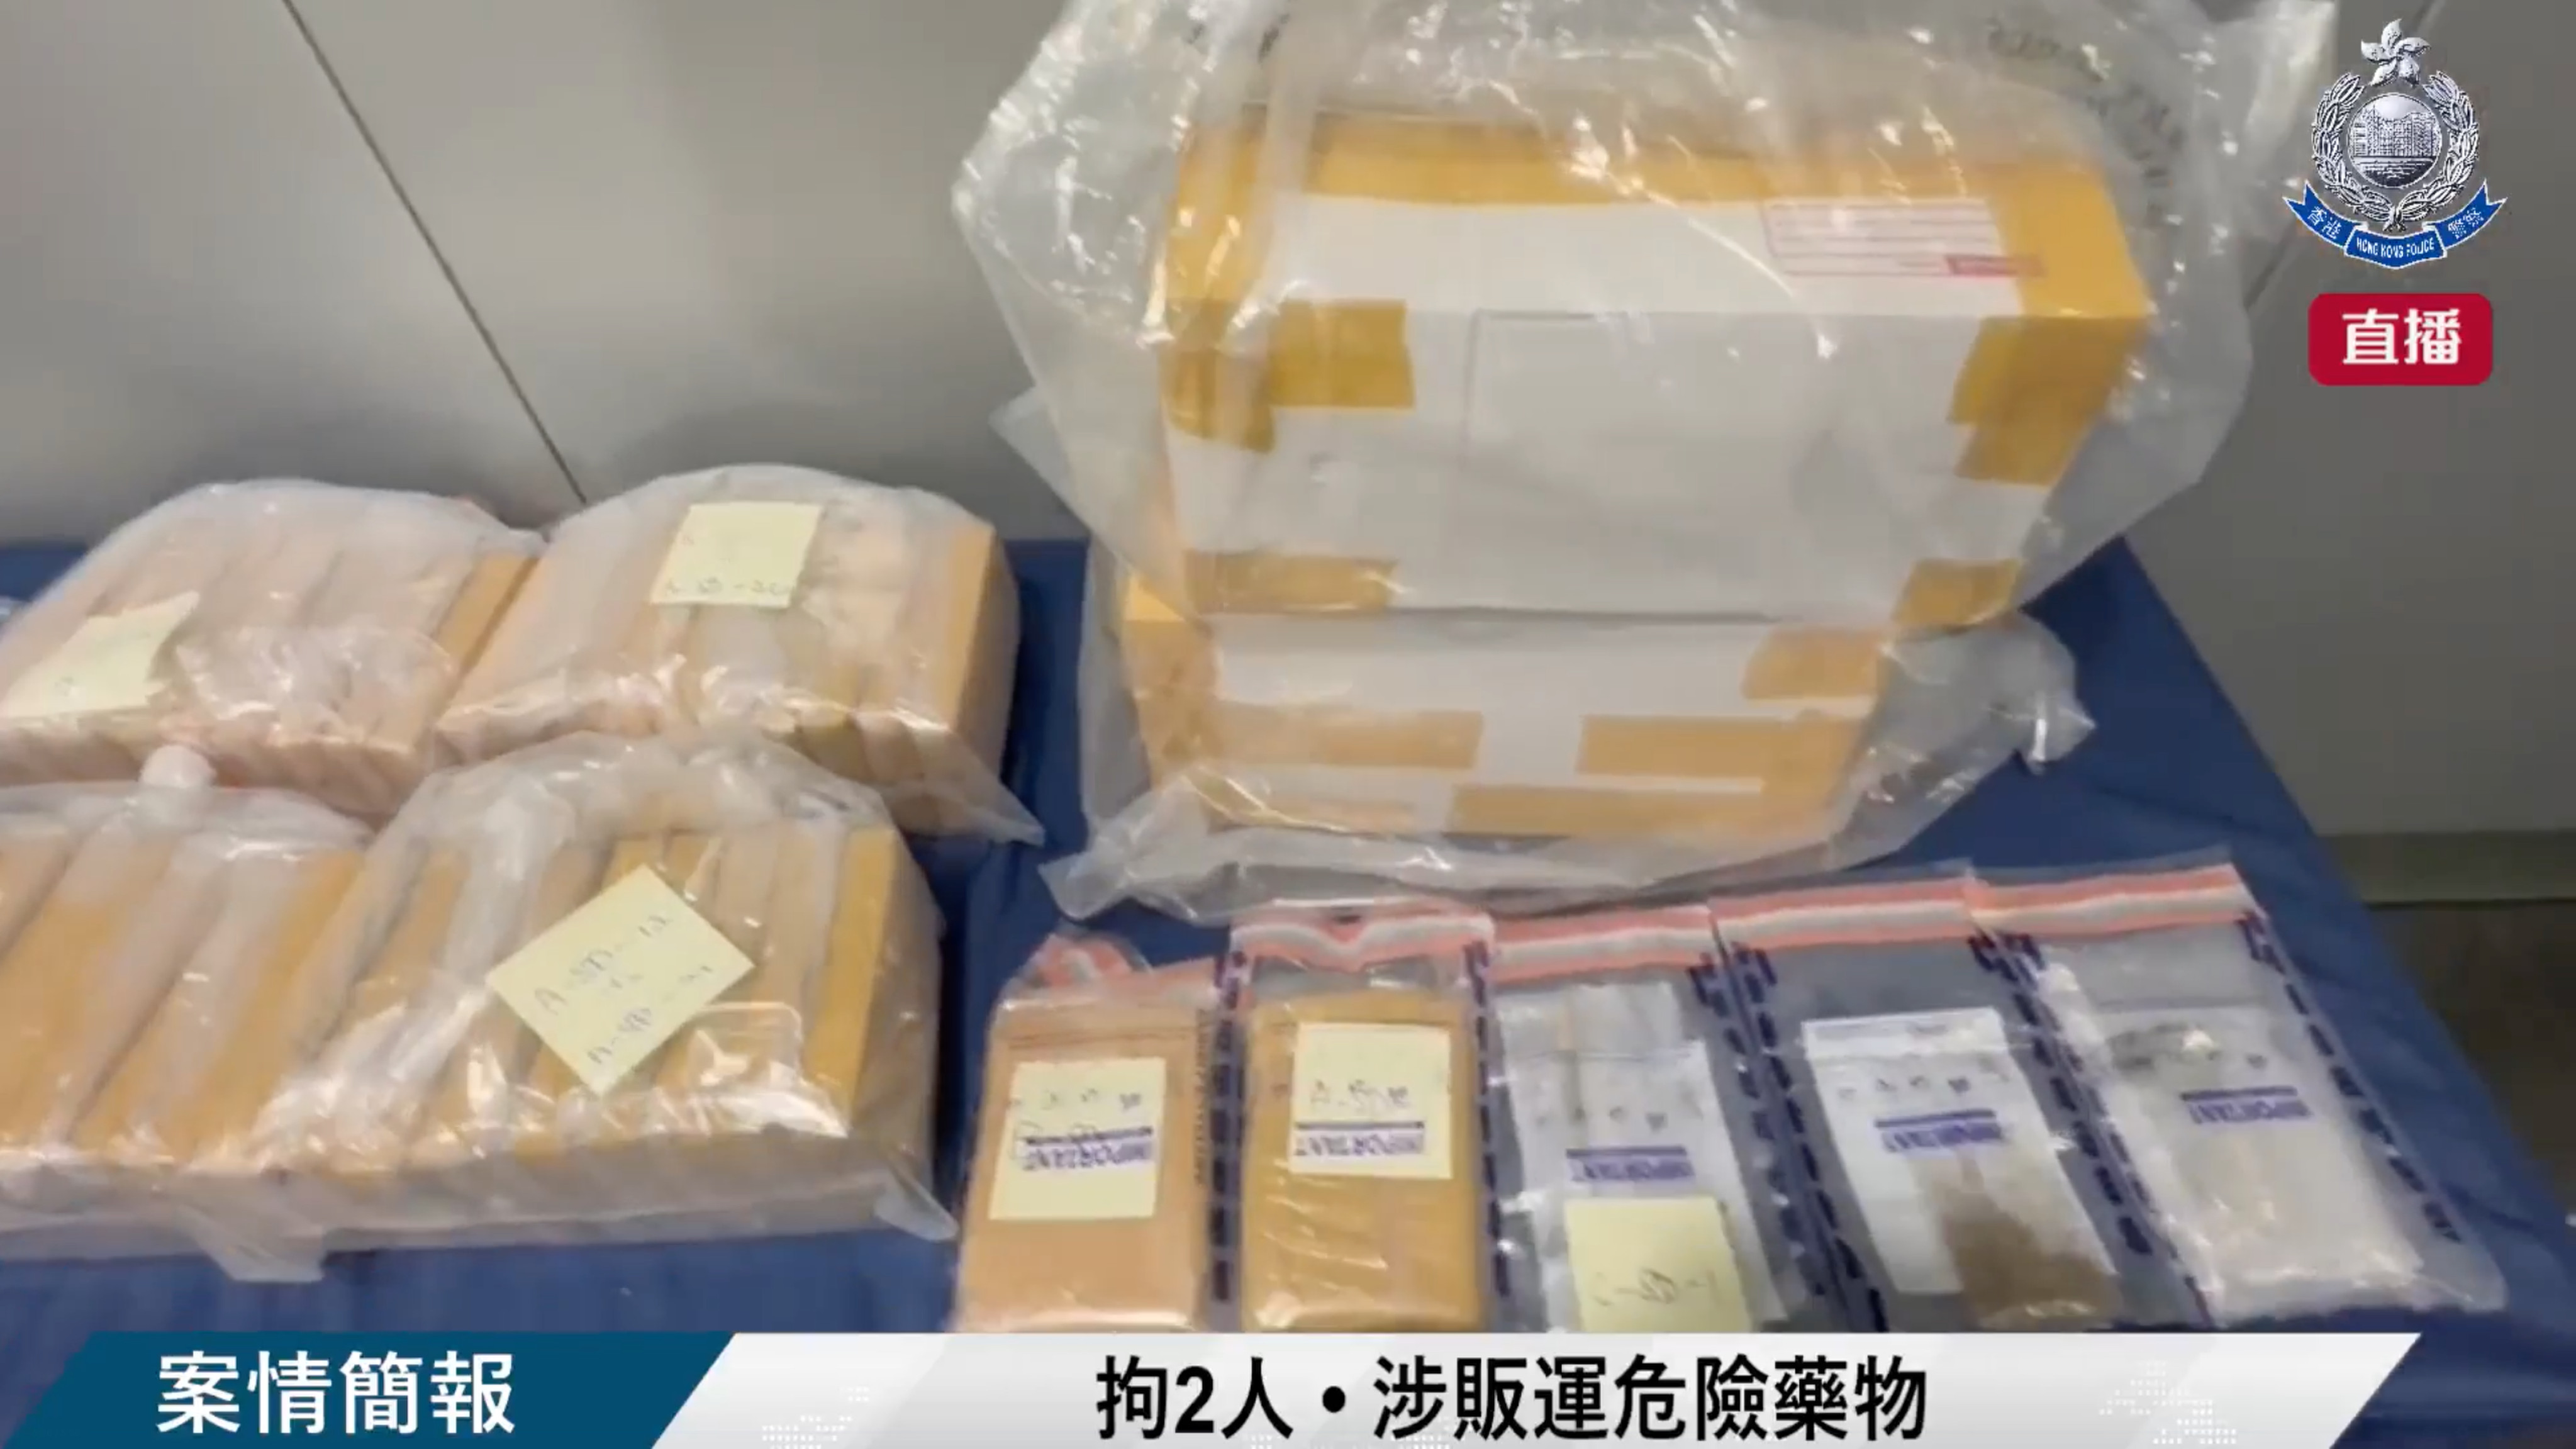 The pair had allegedly hidden 14.3kg of heroin and 4kg of marijuana inside their luggage and a backpack. Photo: Handout 